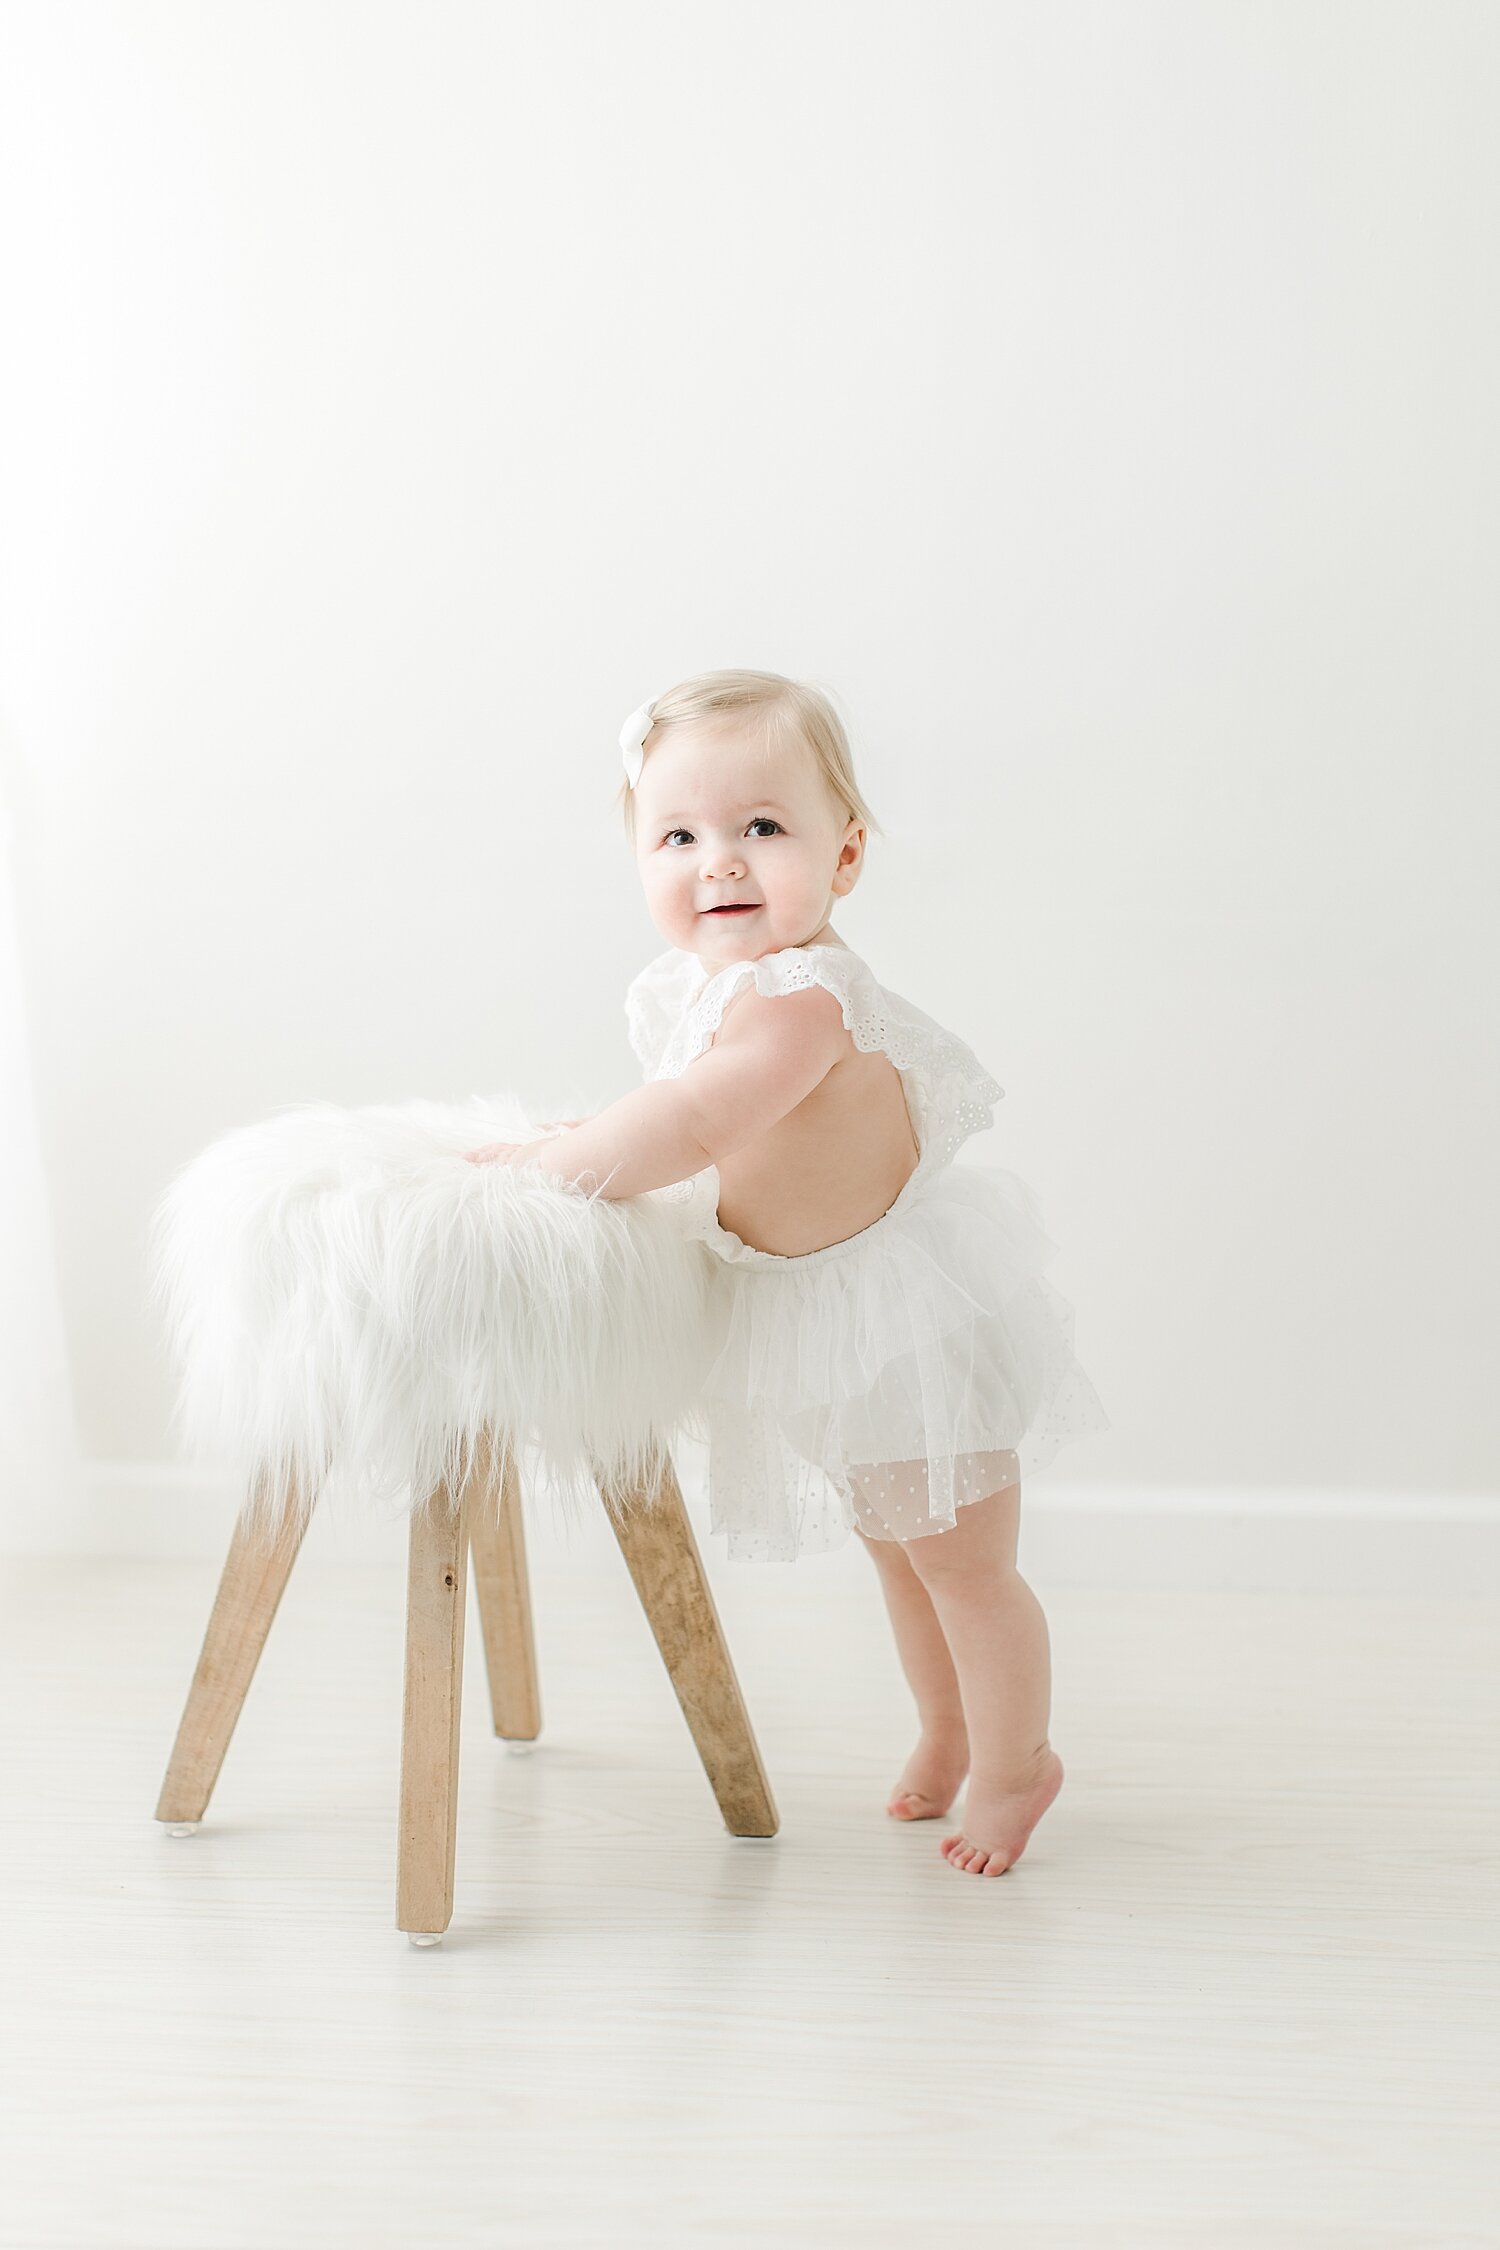 Baby girl in all white standing by a stool for photos for her first birthday. Photo by Kristin Wood Photography.